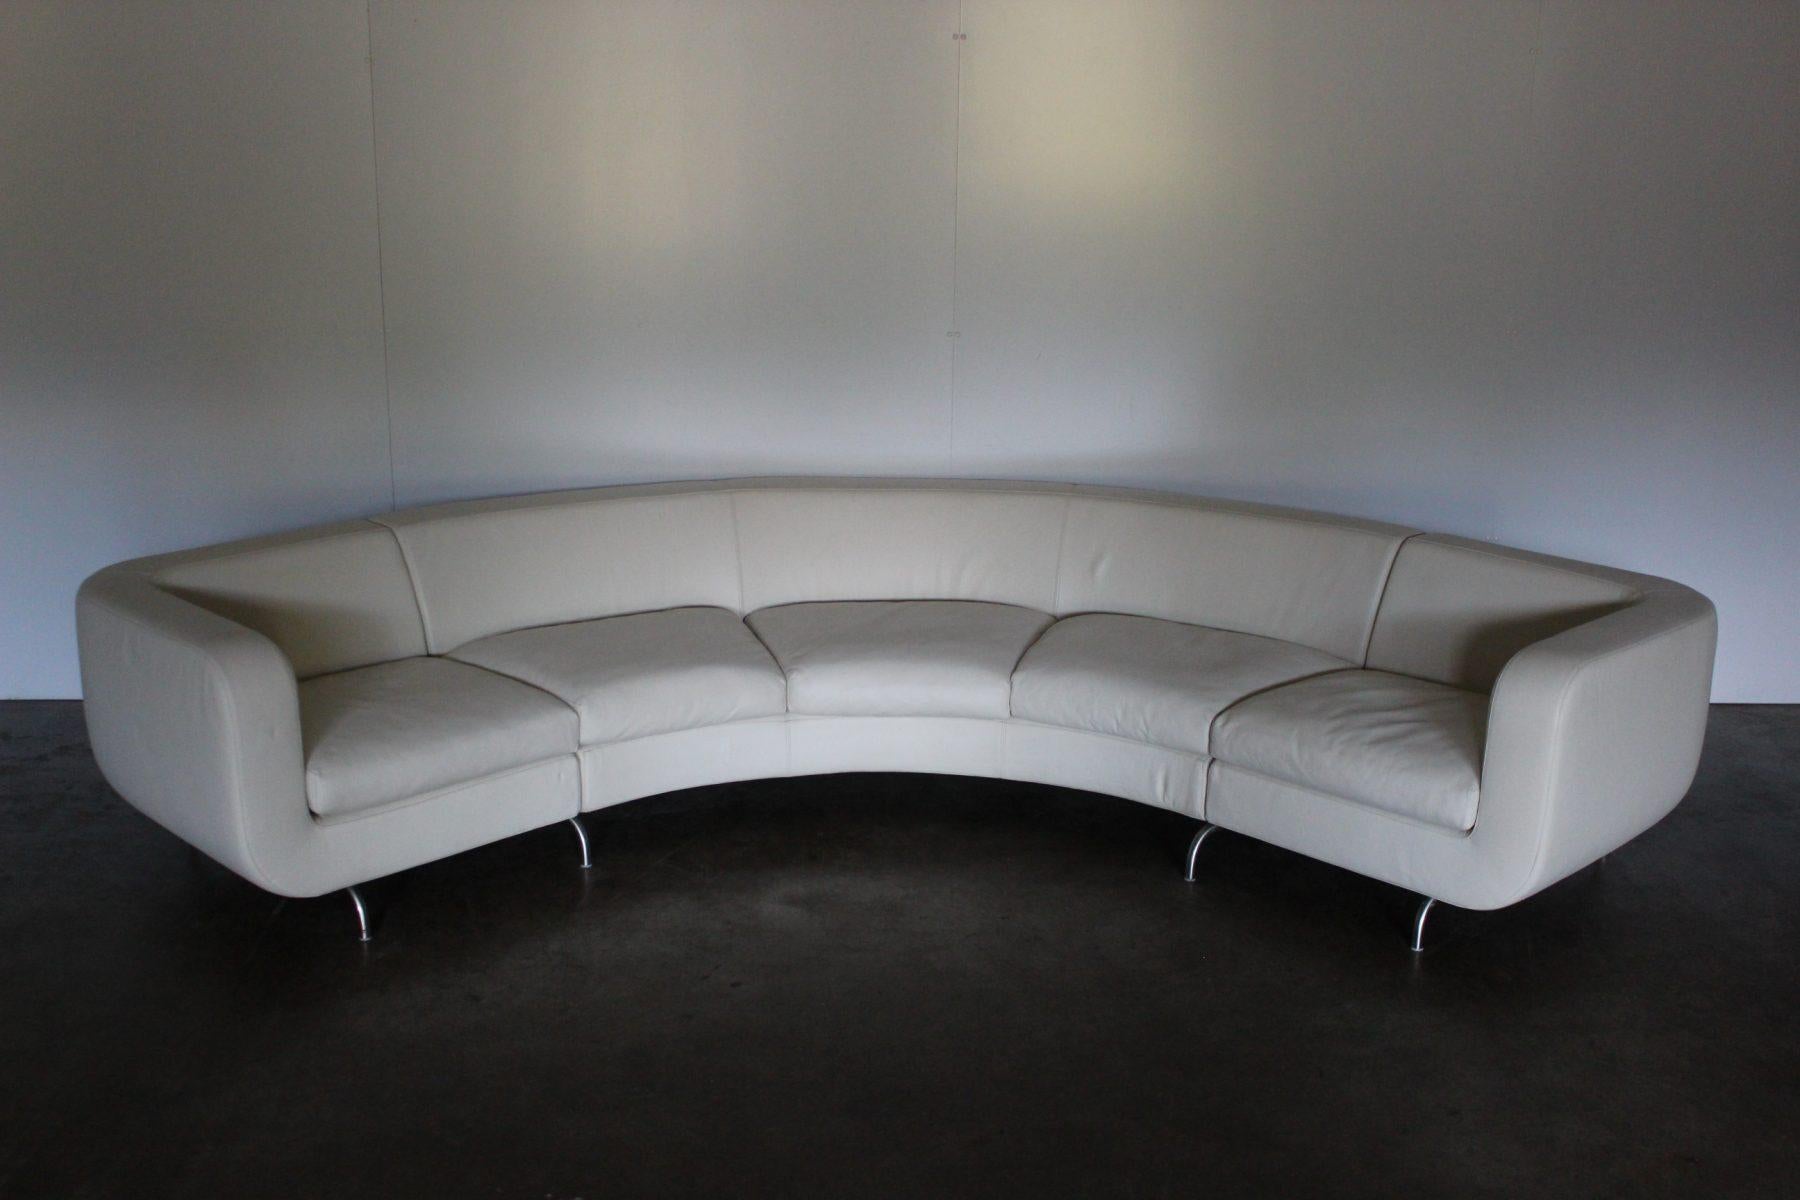 Hello Friends, and welcome to another unmissable offering from Lord Browns Furniture, the UK’s premier resource for fine Sofas and Chairs.

On offer on this occasion is a superb, Minotti “Dubuffet” 5-Seat “Composition B” Curved Sofa, dressed in a